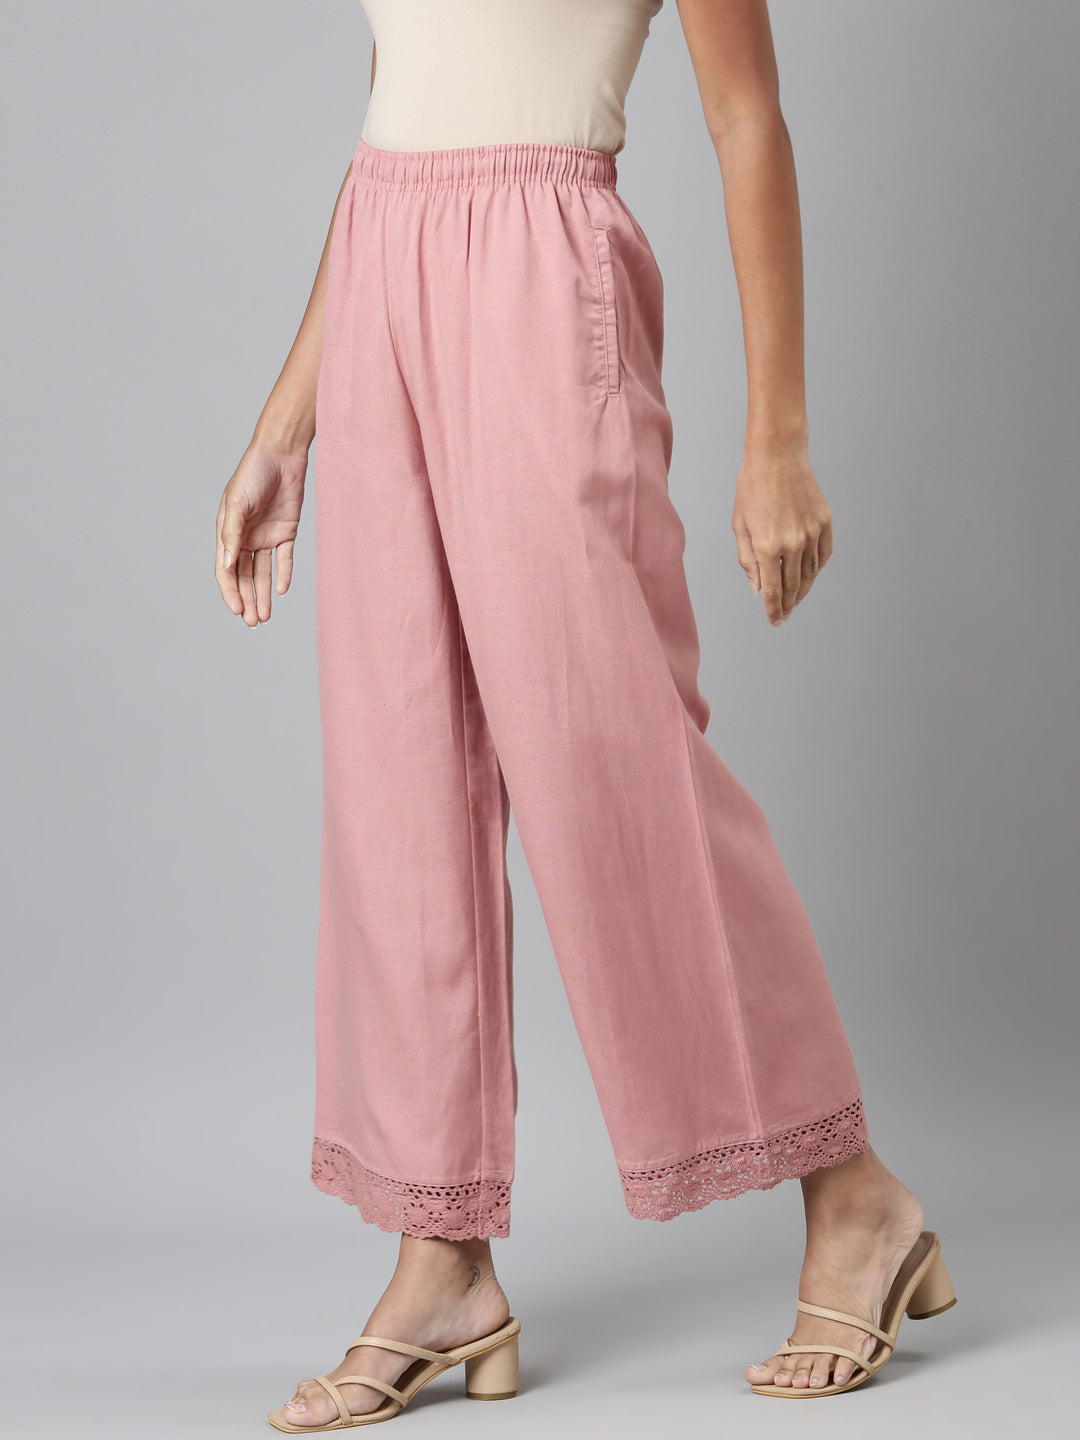 Buy YOZLY Women's Rayon Solid Baby Pink Palazzo Pants Free Size at Amazon.in